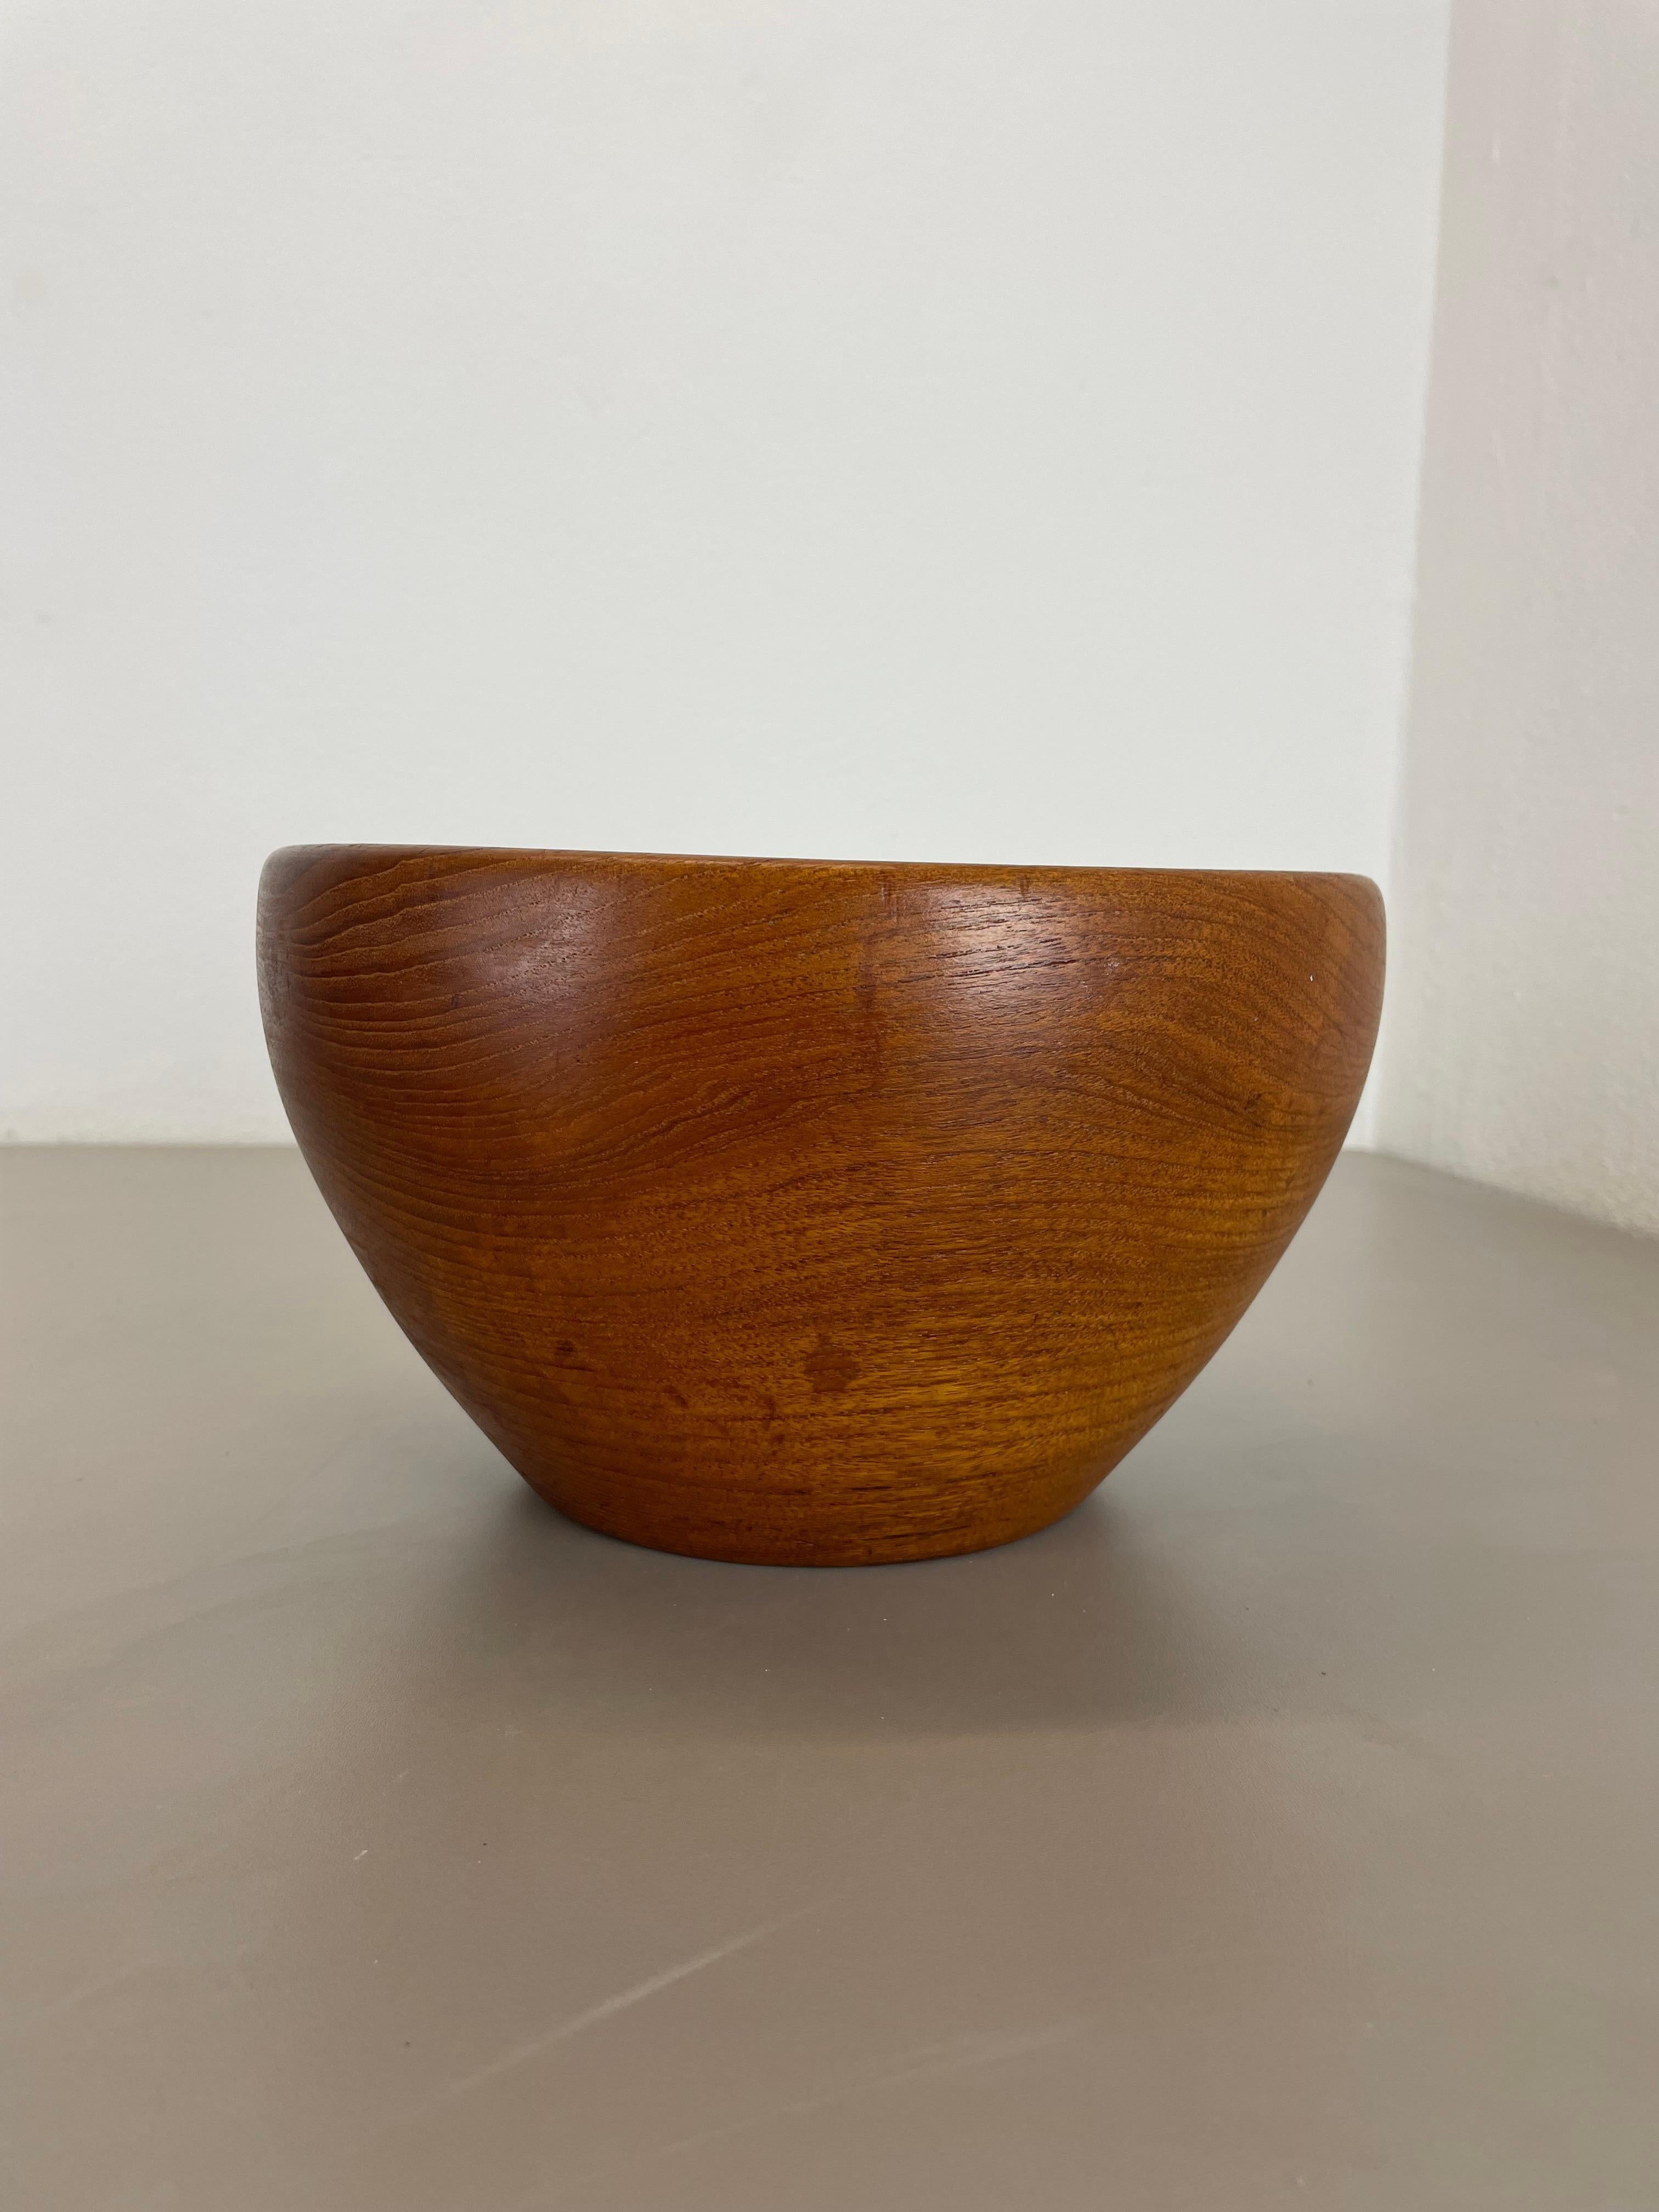 Article:

teak bowl shell 




Description:

Original vintage wooden bowl element made in Austria in the 1970s. the element is made of solid teak wood in one piece. It has a fantastic surface flamed structure and nice shaped round form.
This item